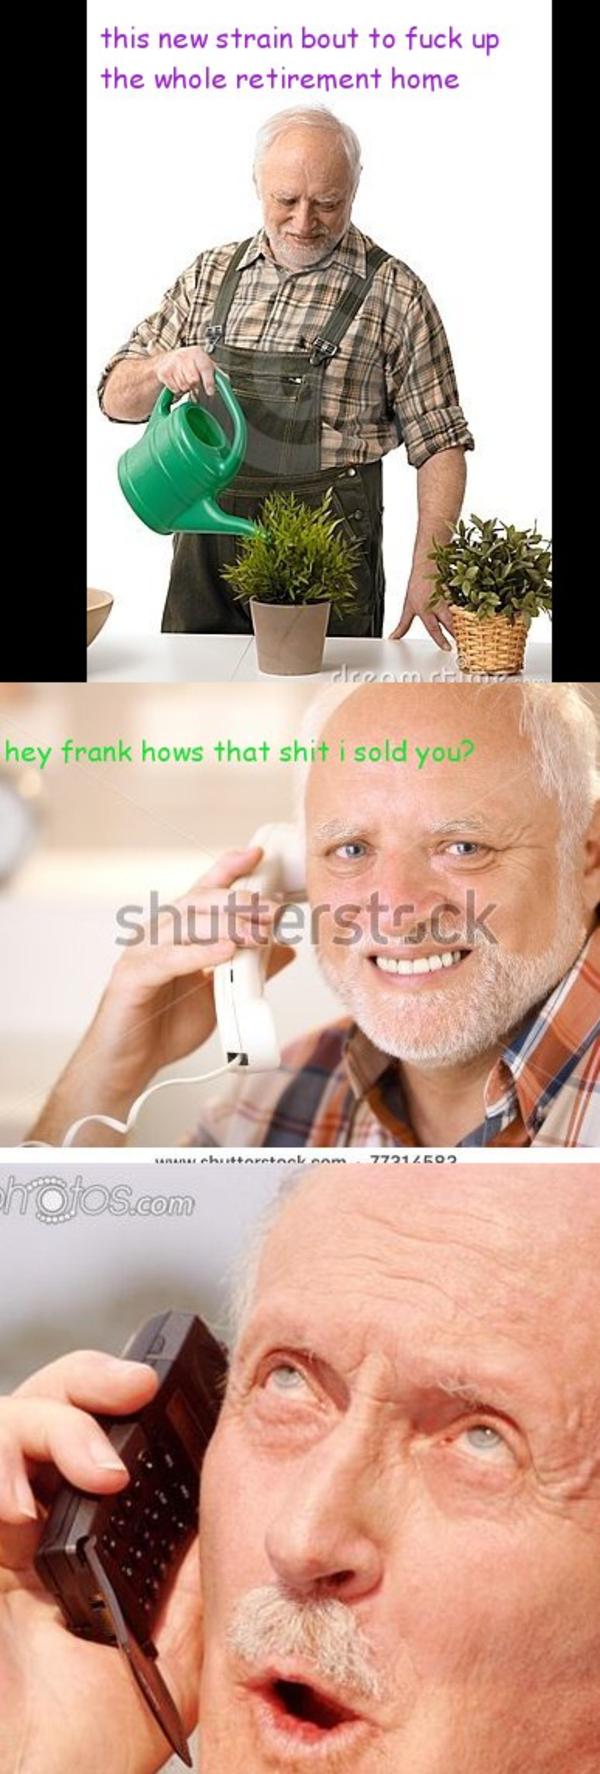 stock photo captions - this new strain bout to fuck up the whole retirement home ce hey frank hows that shit i sold you? shutterstock sanan hittaretaalam 77212502 hotos.com